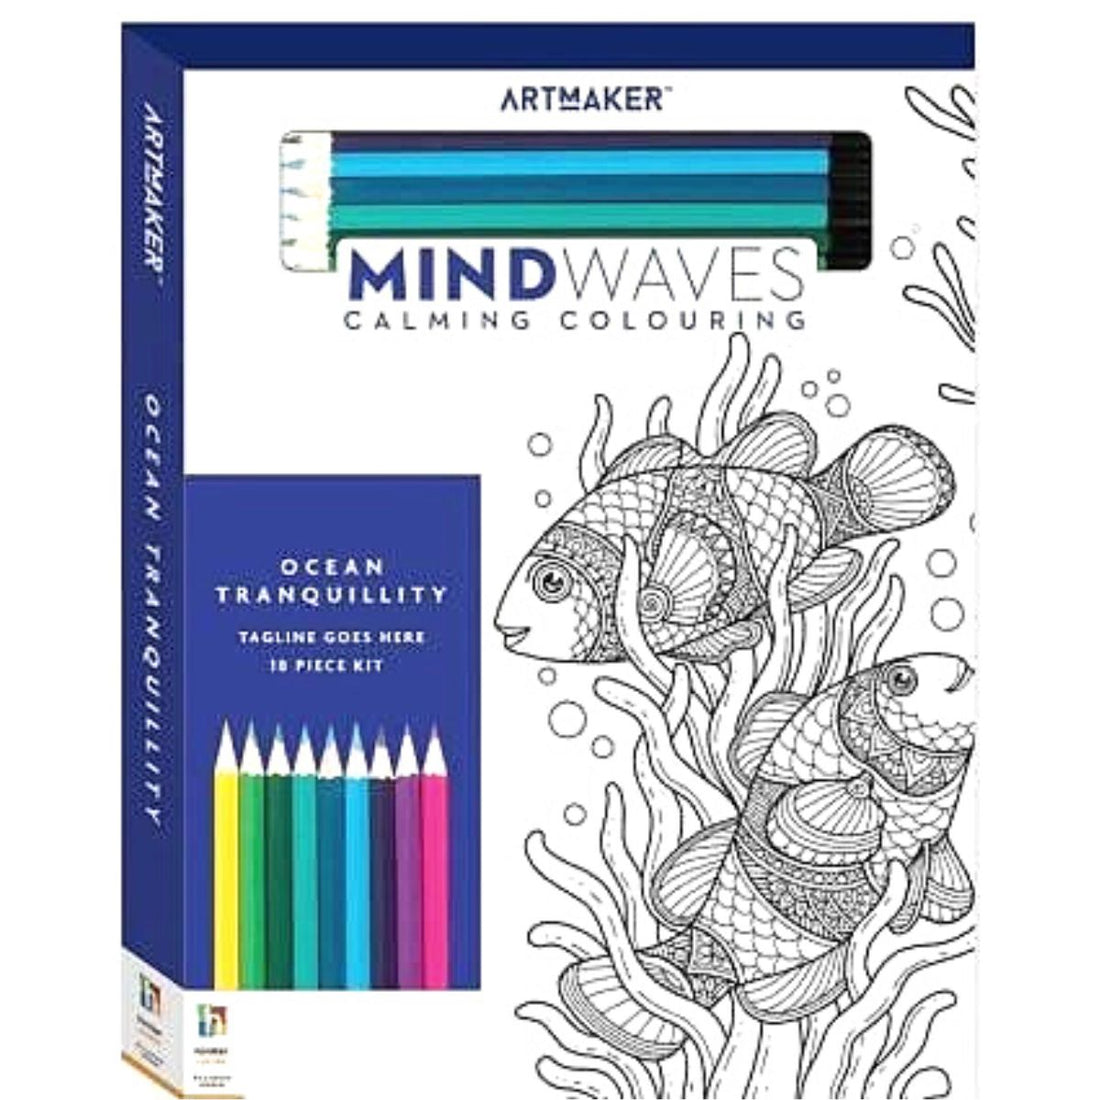 Mindwaves Calming Colouring Tranquillity - Books - Adult Colouring - Adults  - Hinkler